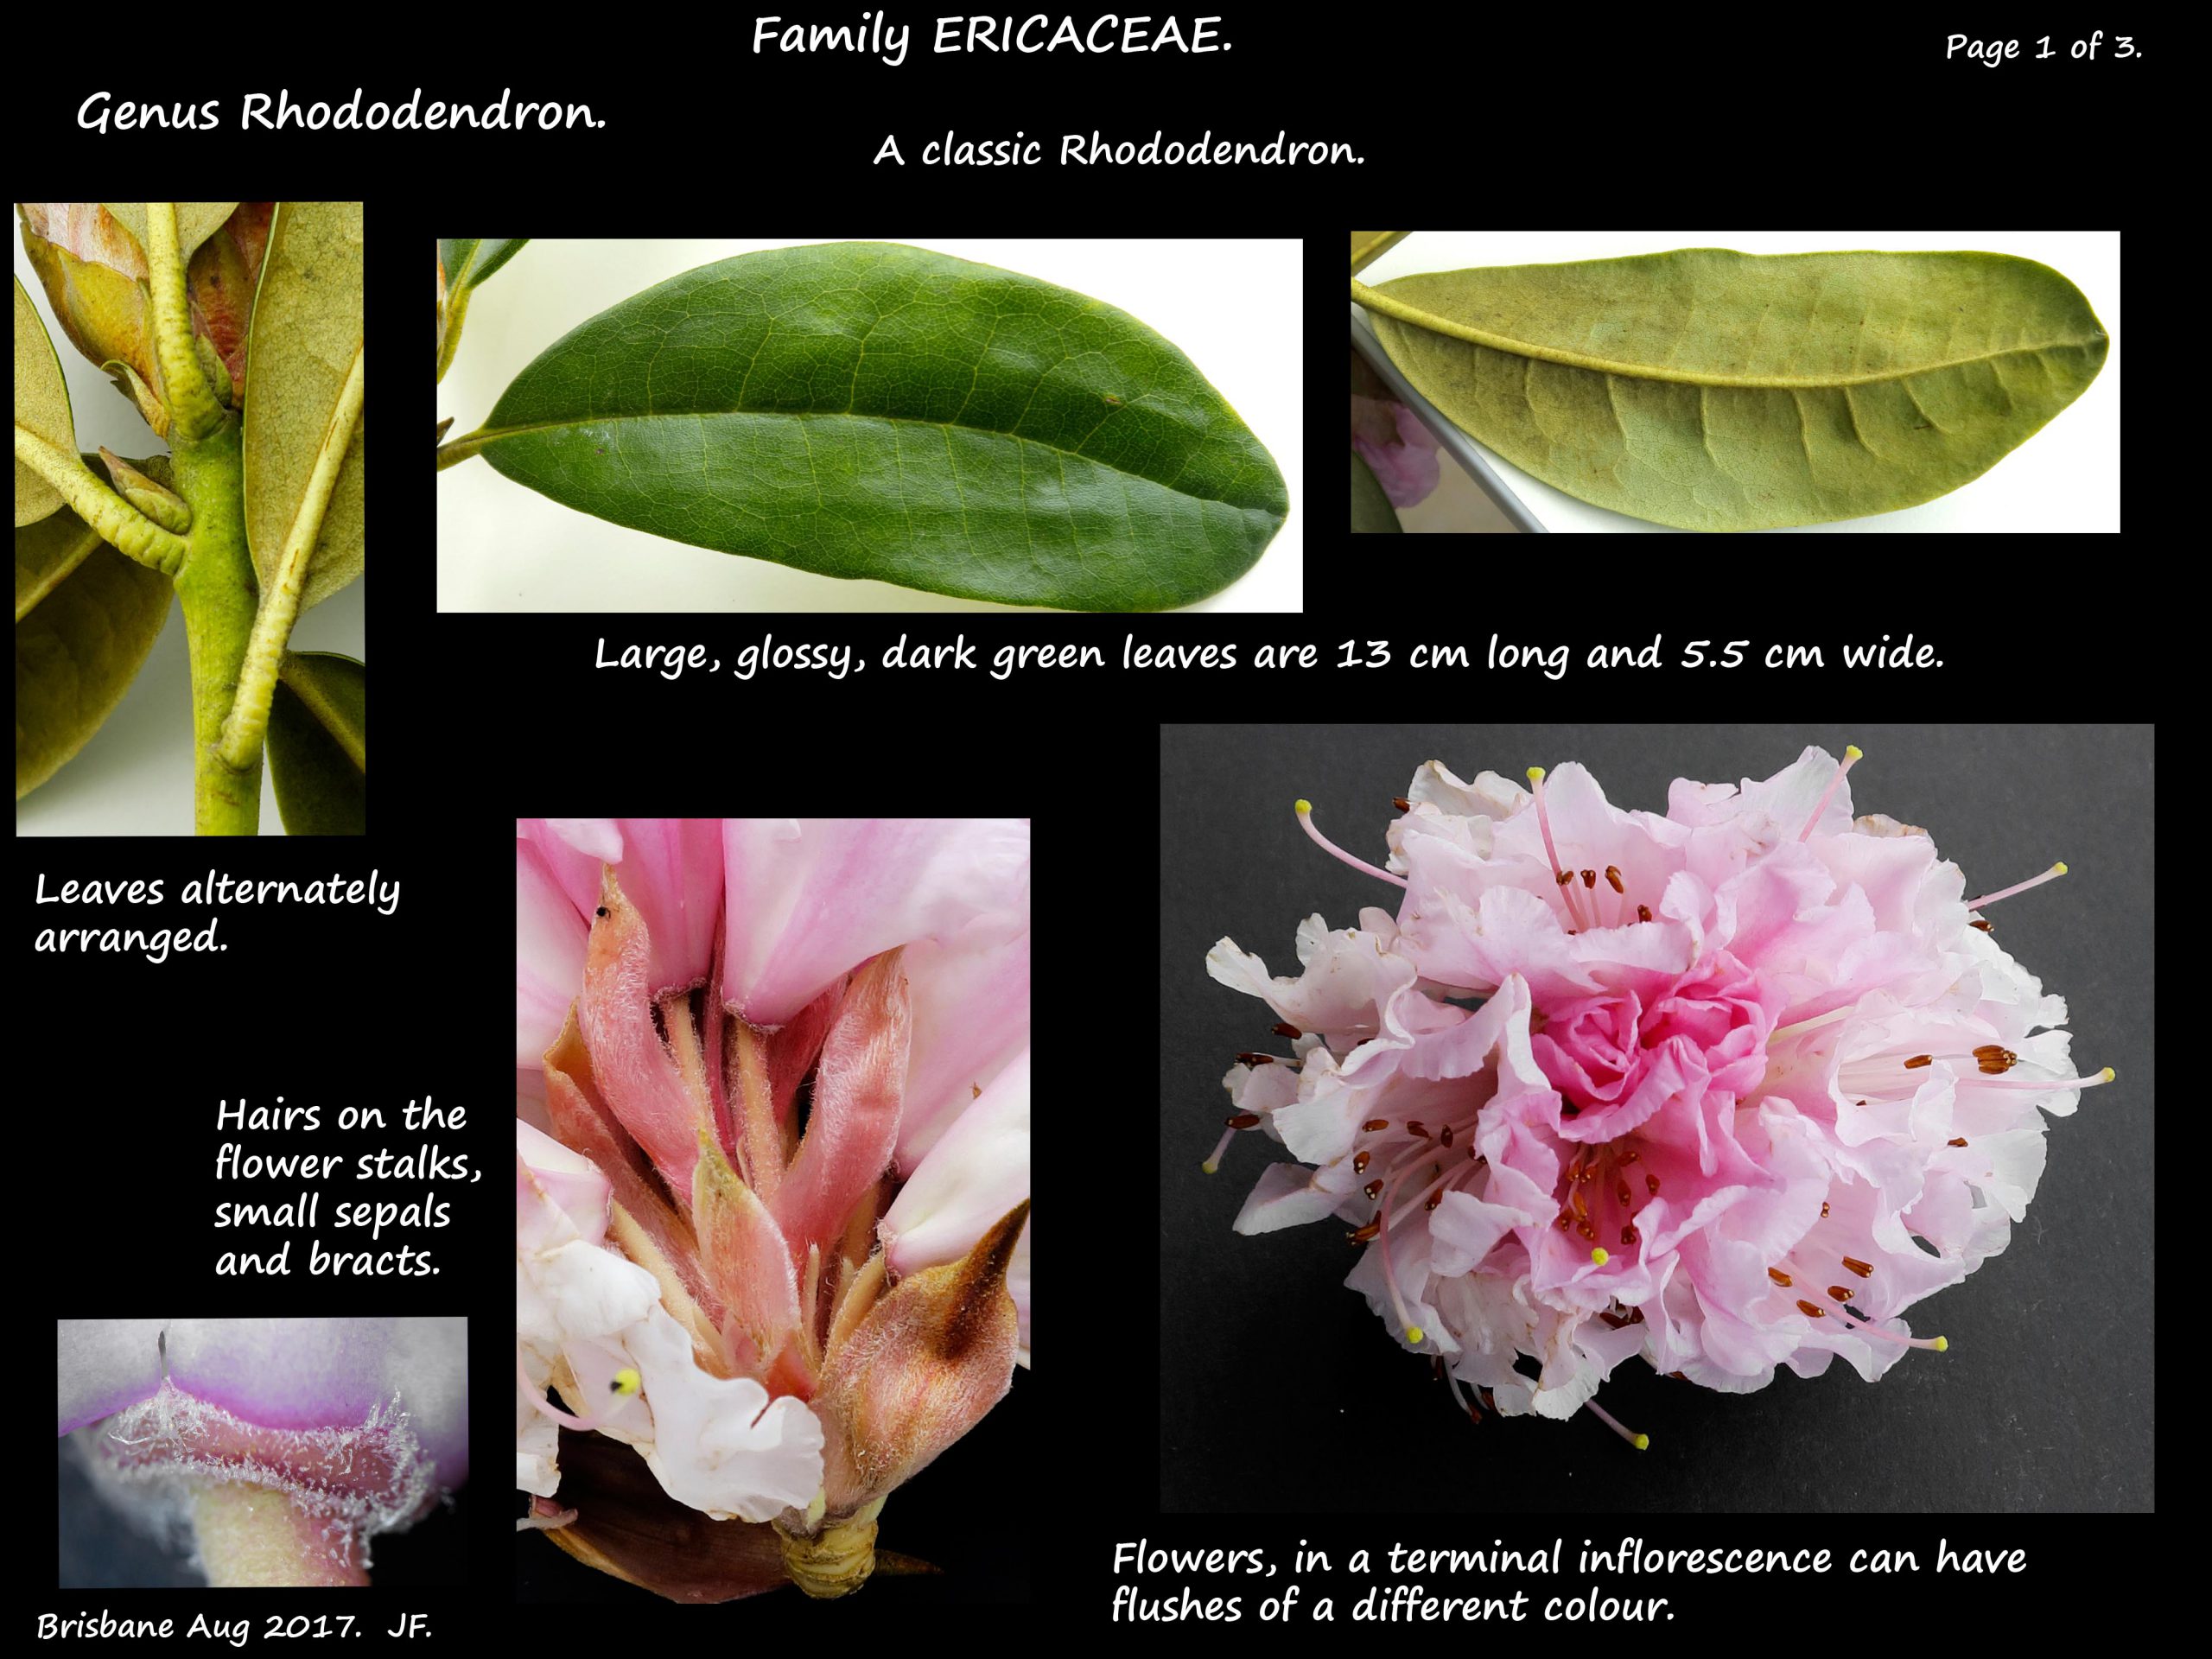 3 A pale pink Rhododendron